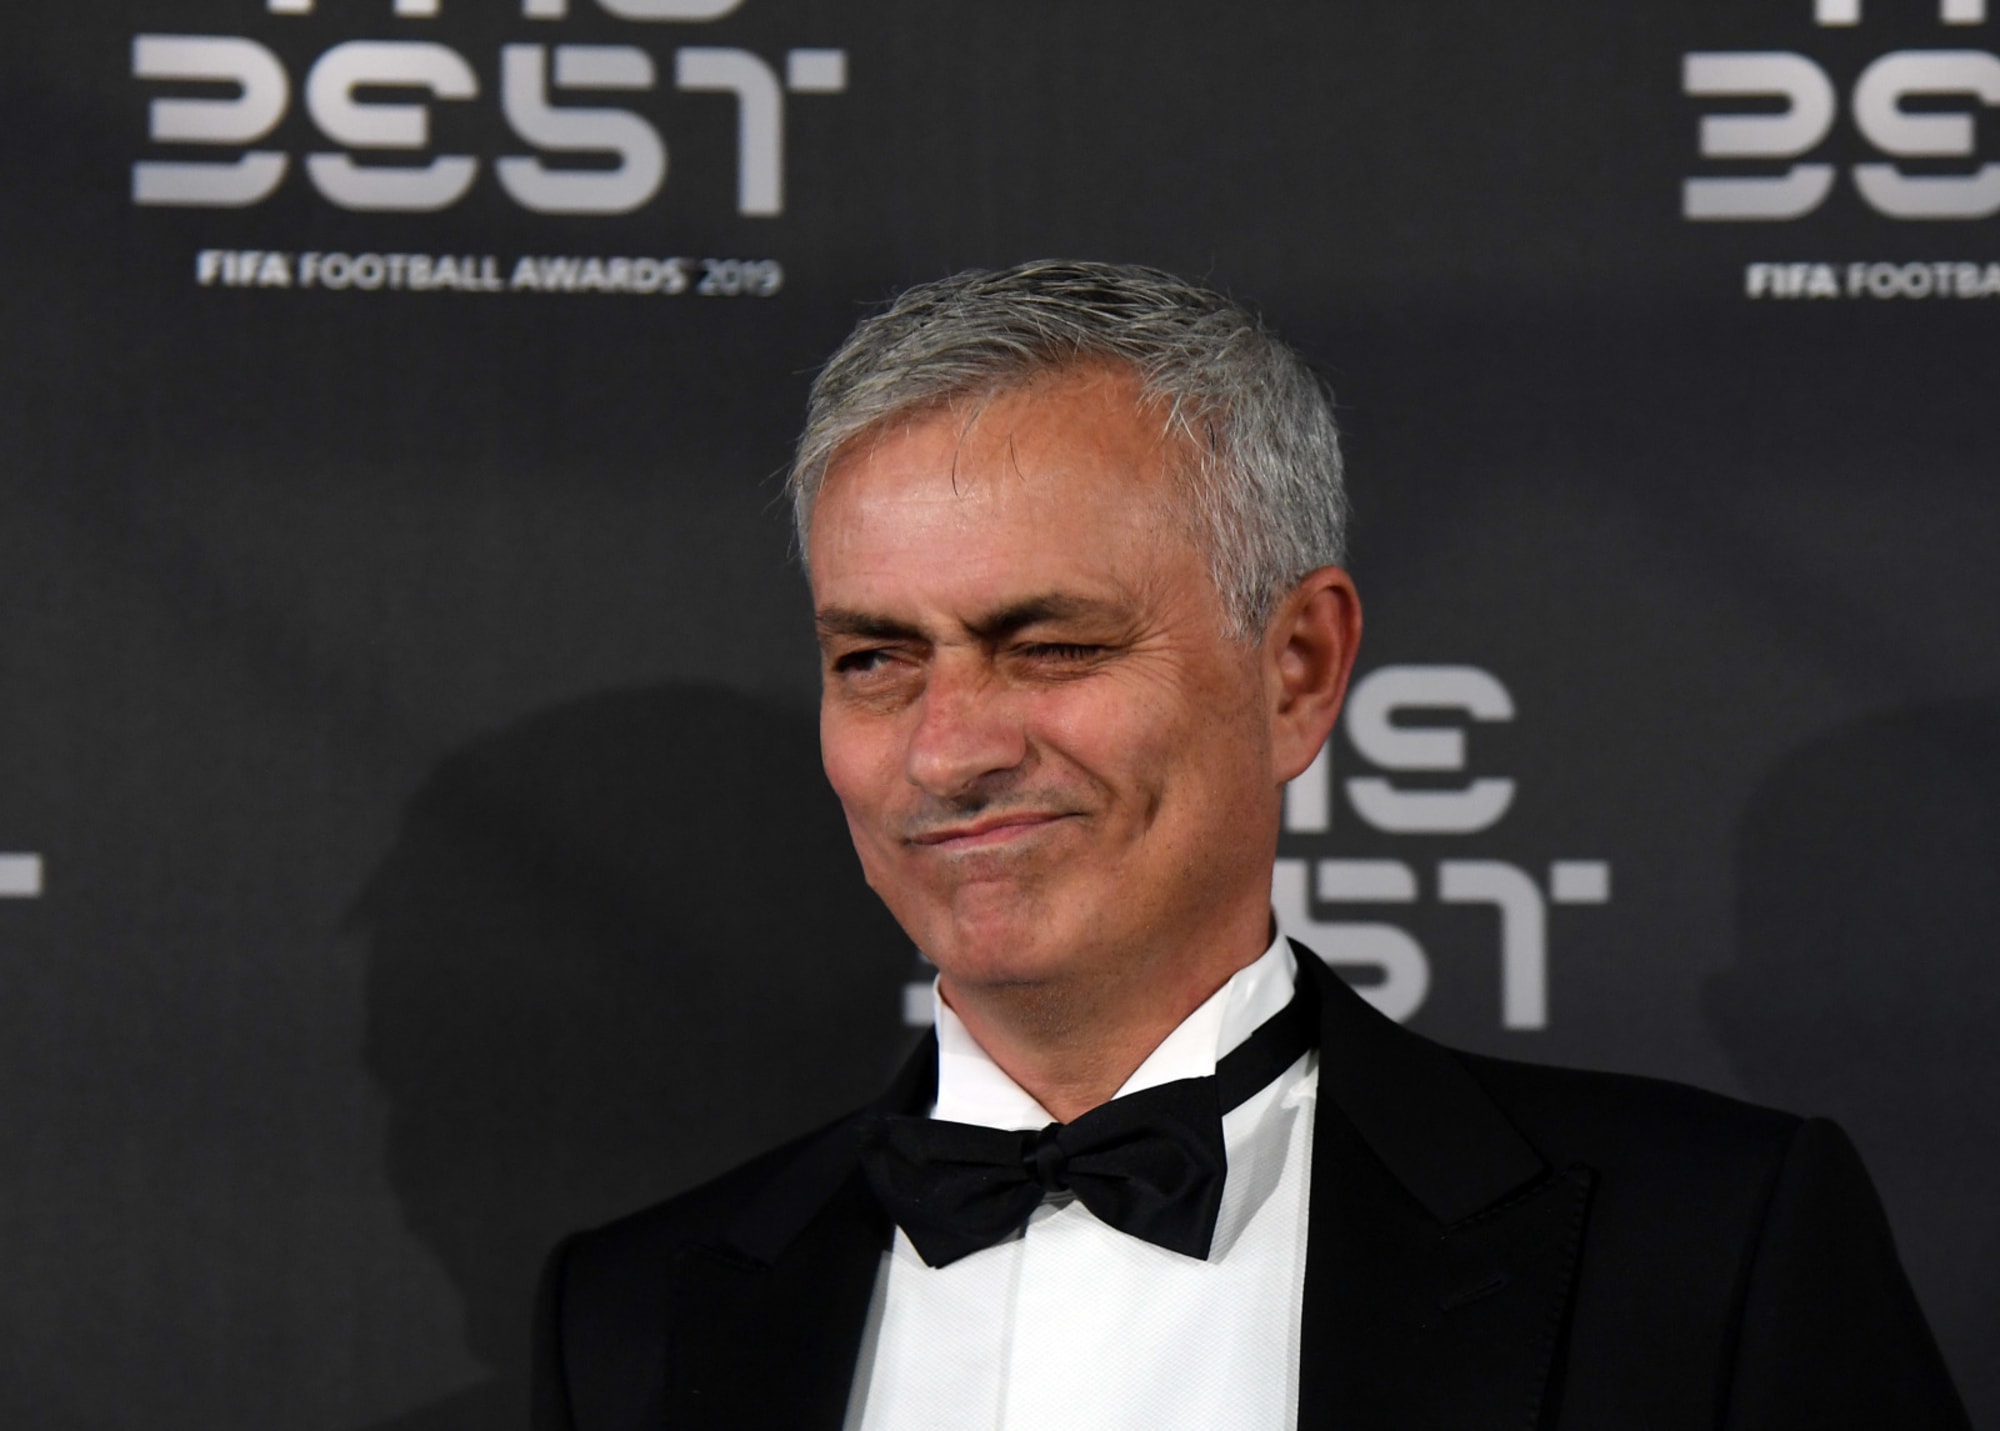 Real Madrid: Jose Mourinho reportedly wants a return